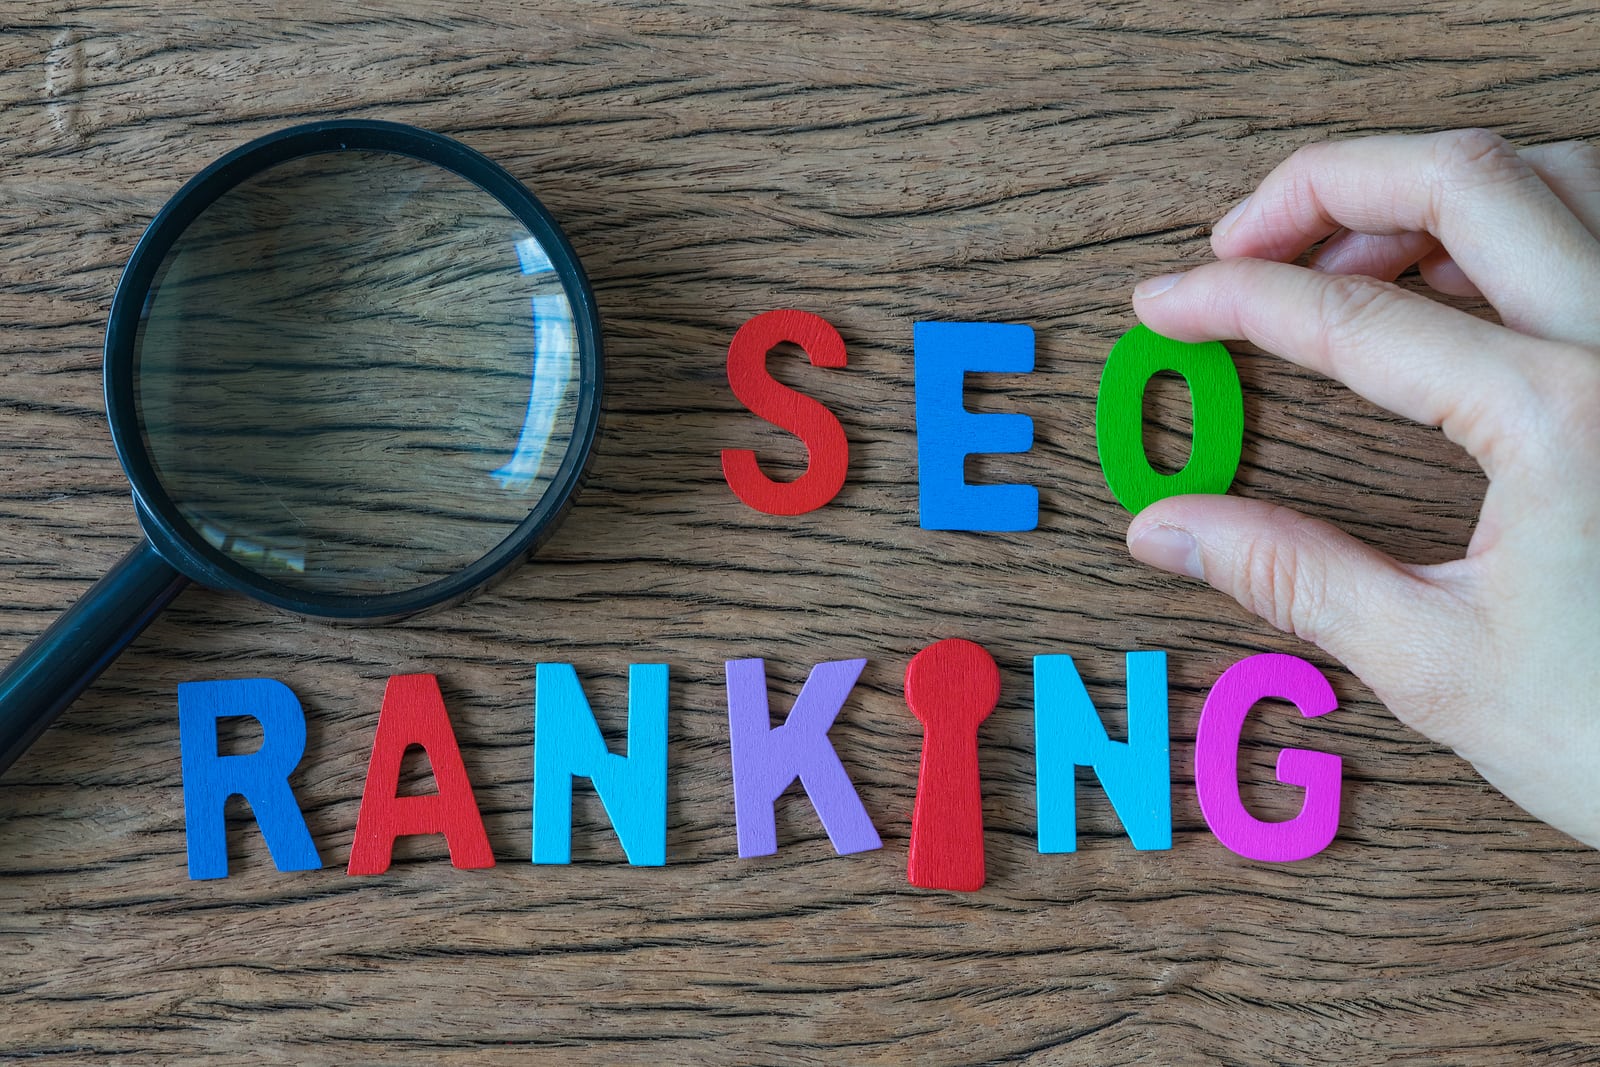 Good reviews can help your search engine ranking